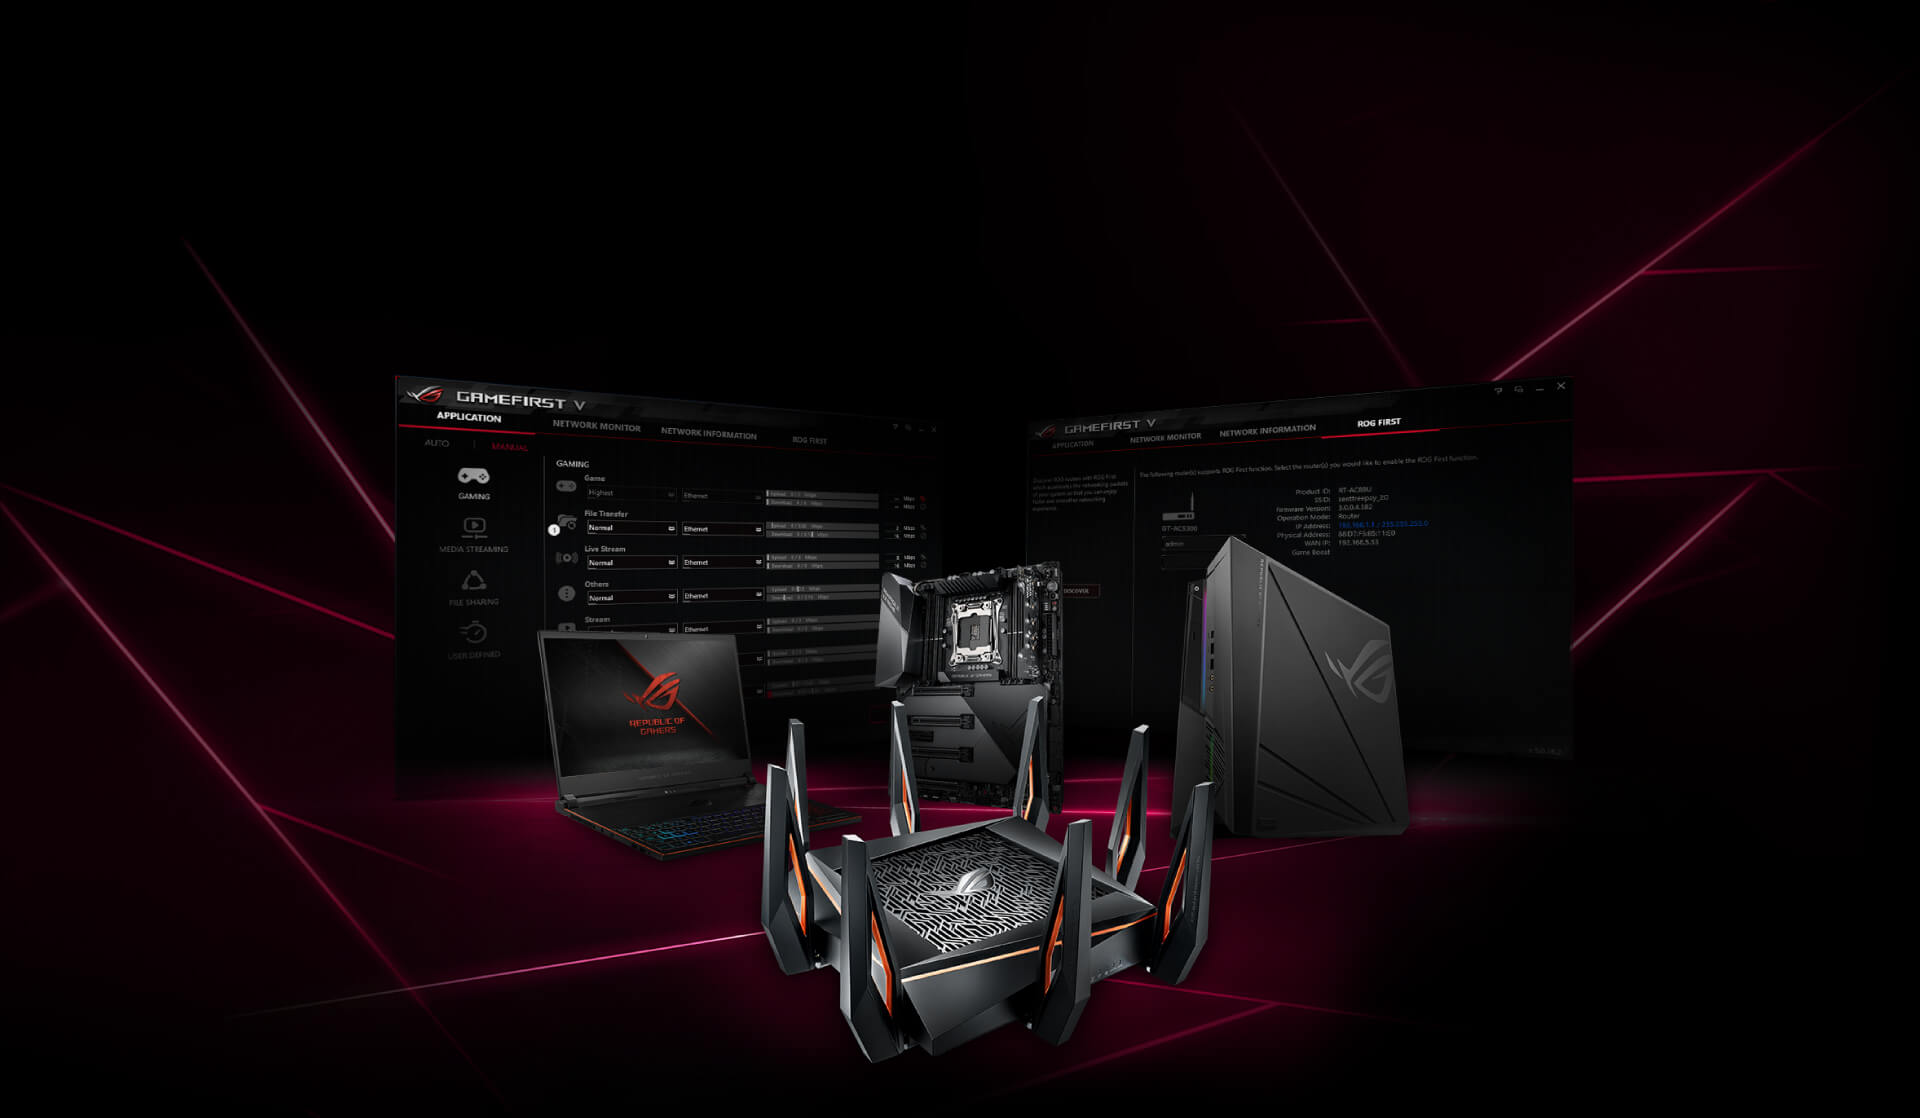 The ROG lineup products with Game First V user interface